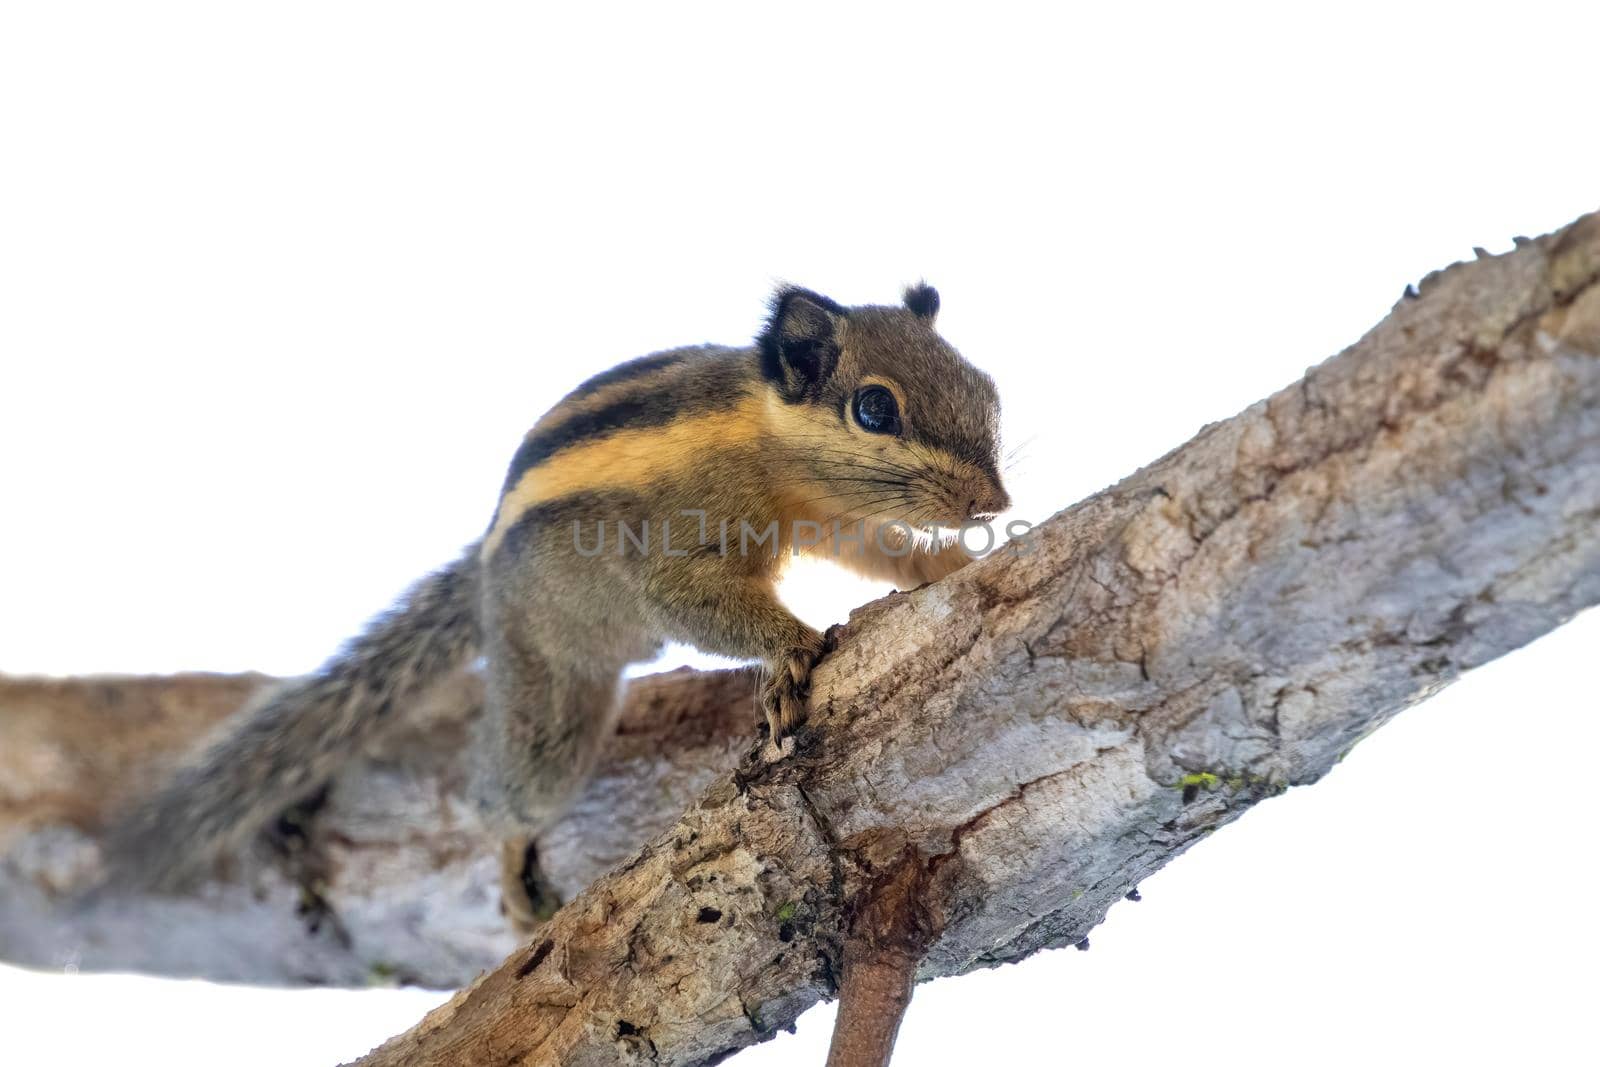 Imags of himalayan striped squirrel or burmese striped squirrel(Tamiops mcclellandii)on a tree. Wild Animals.